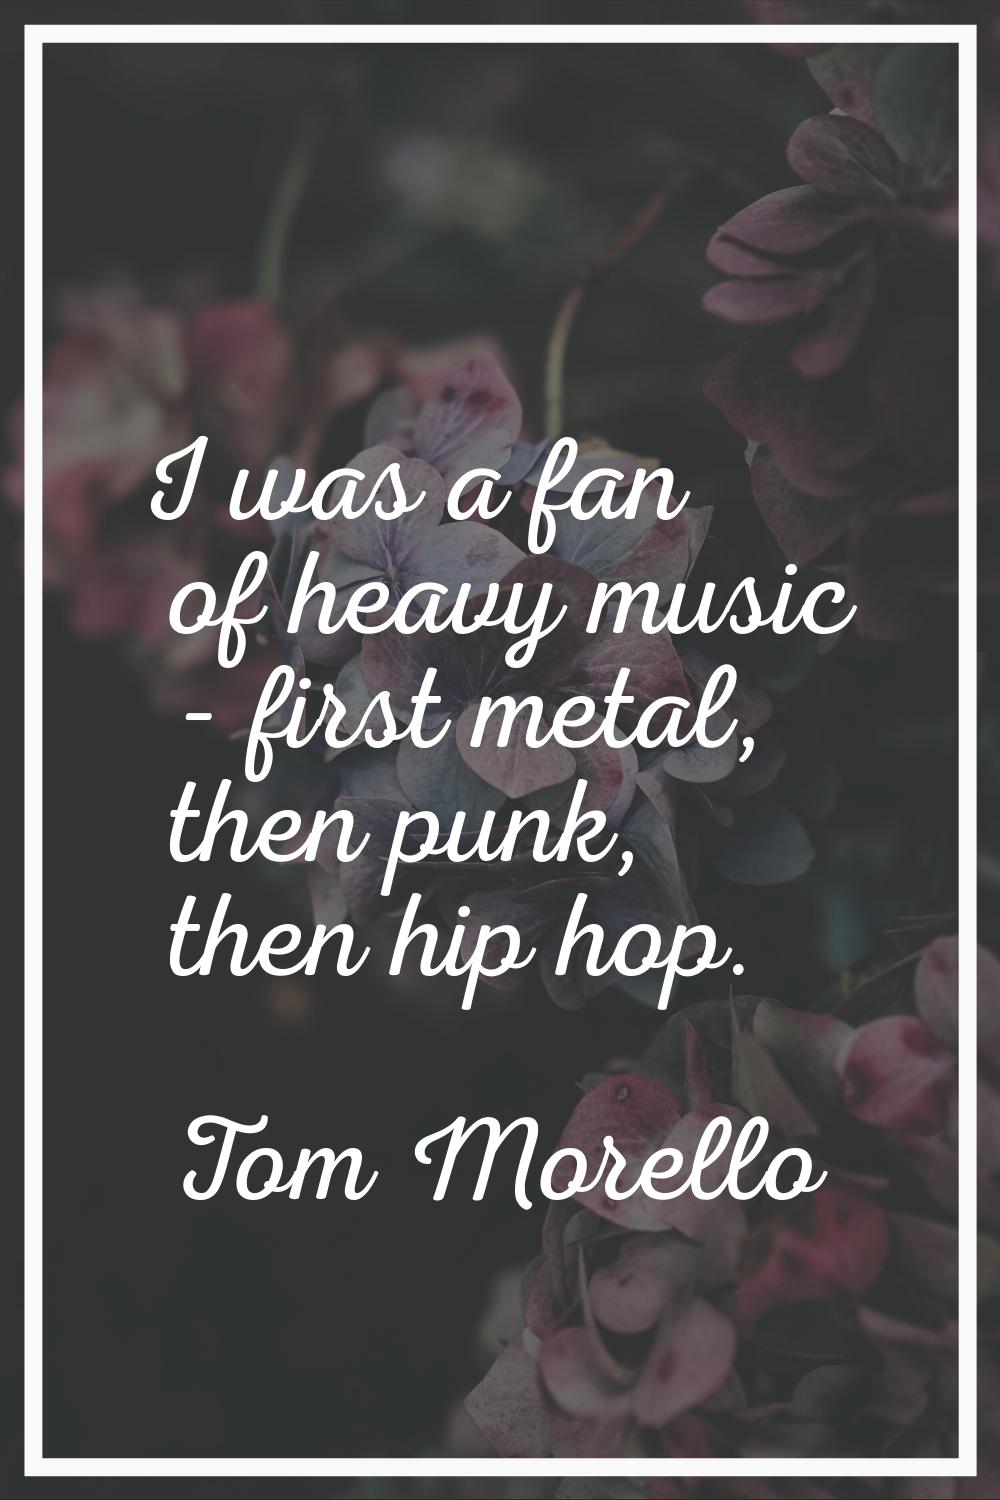 I was a fan of heavy music - first metal, then punk, then hip hop.